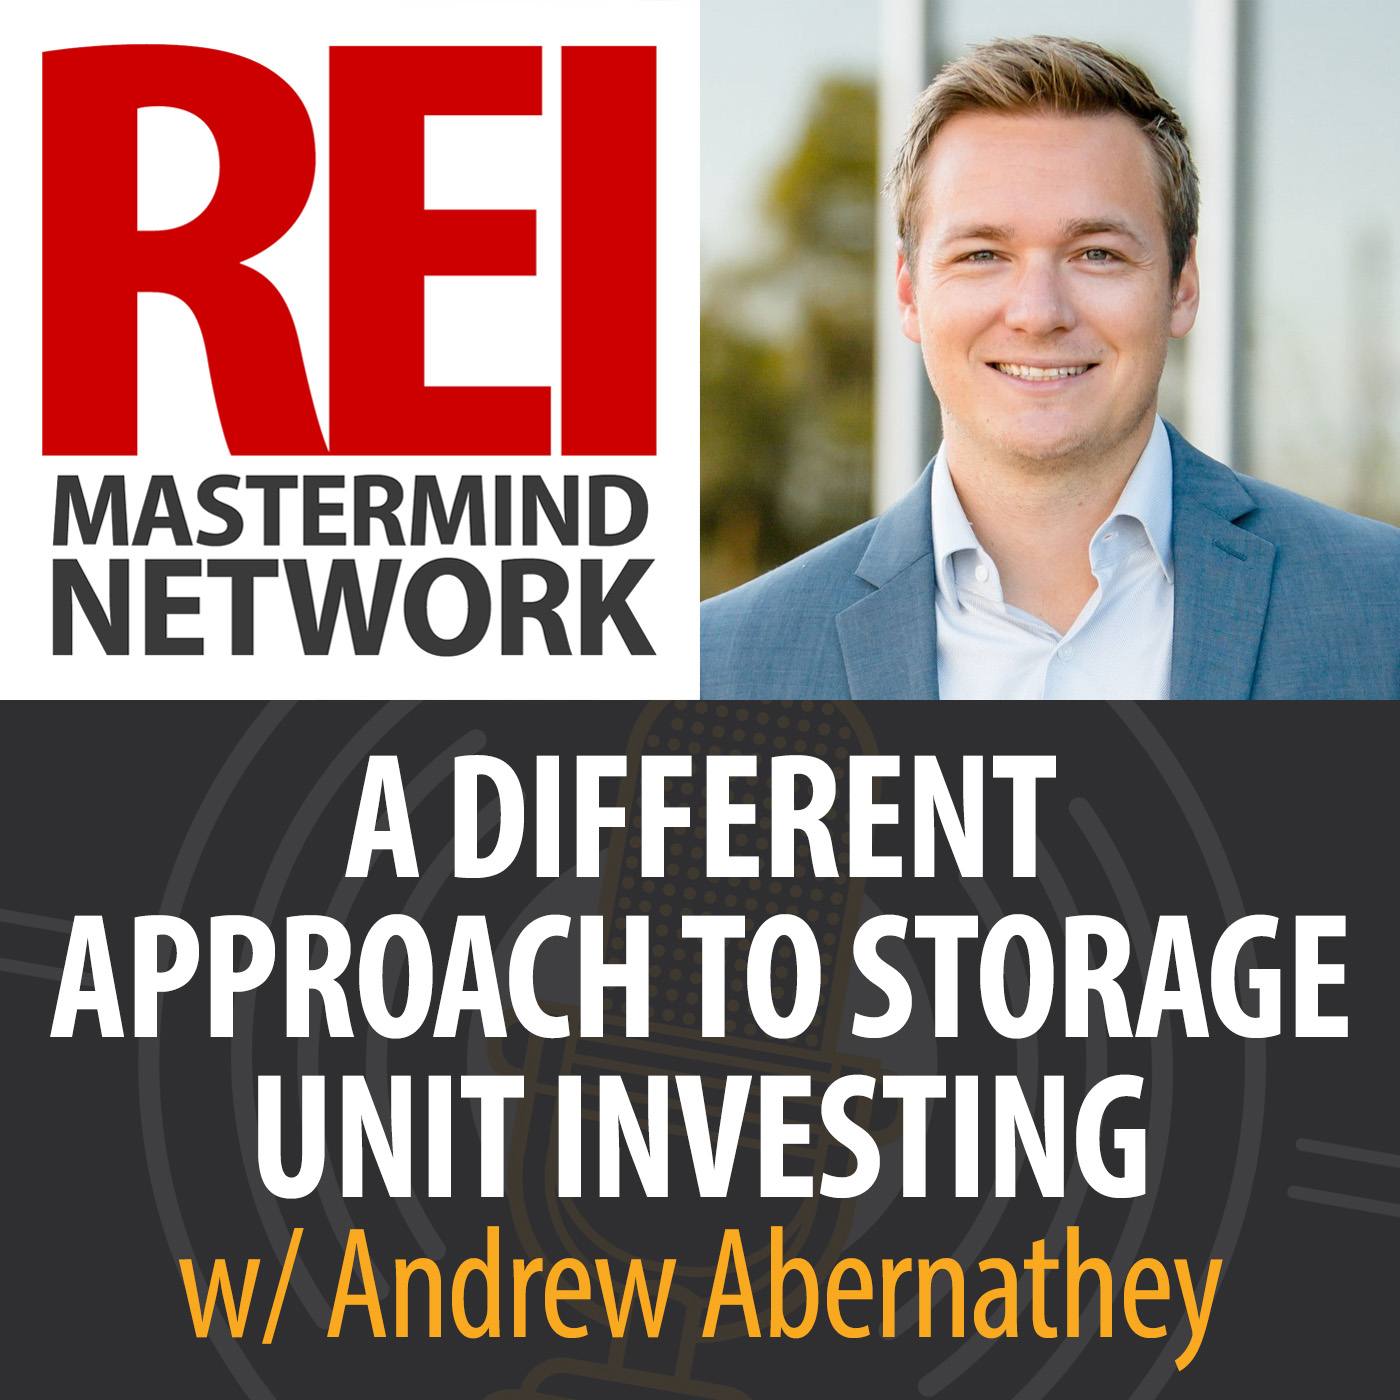 A Different Approach to Storage Unit Investing with Andrew Abernathey Image